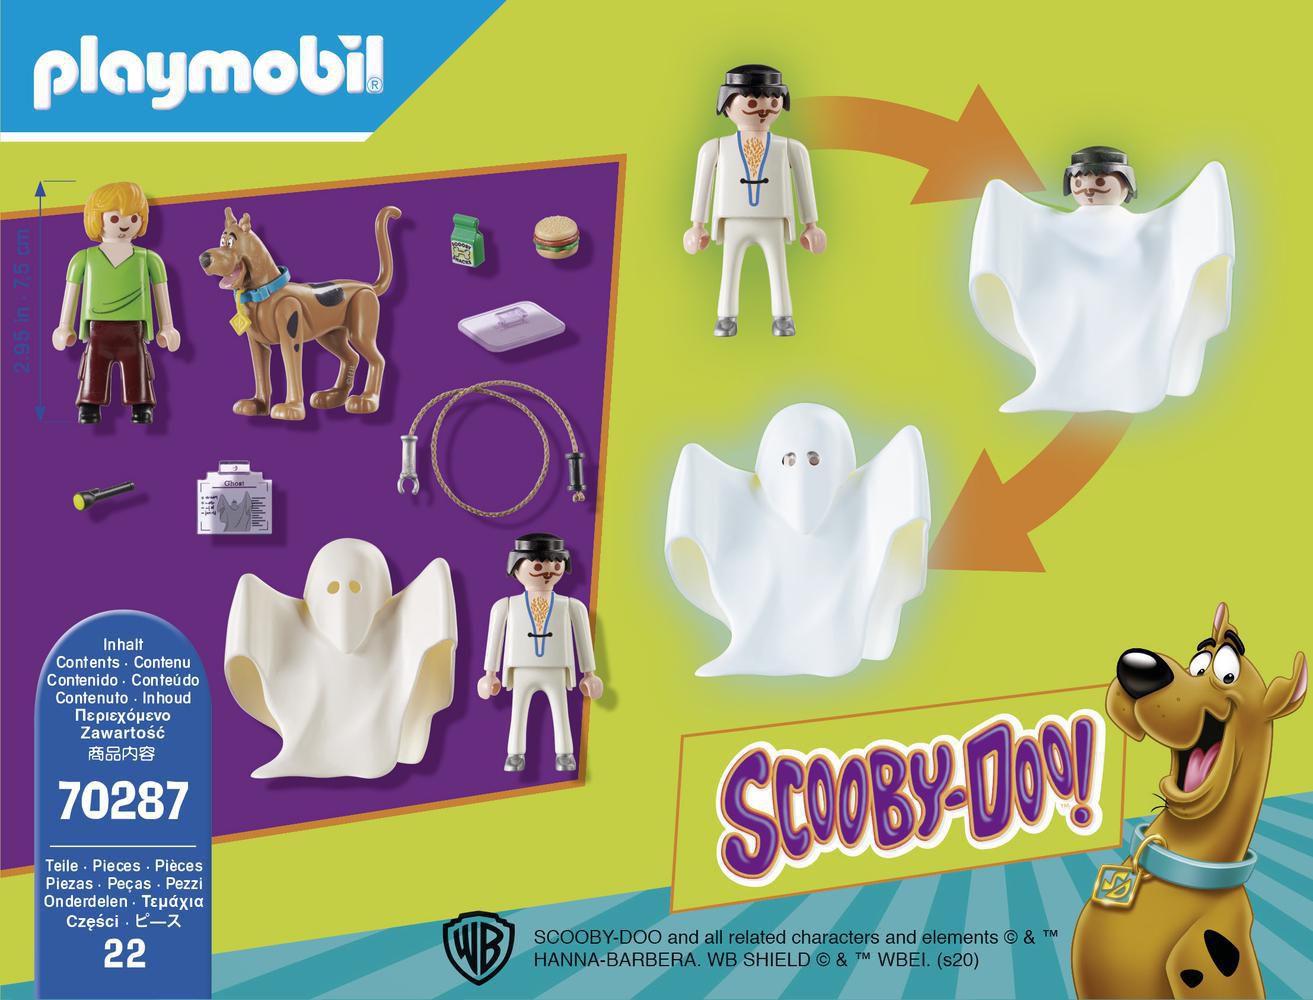 Playmobil SCOOBY-DOO! Scooby & Shaggy with Ghost 70287 Play Set, Age 4+, 19  pcs